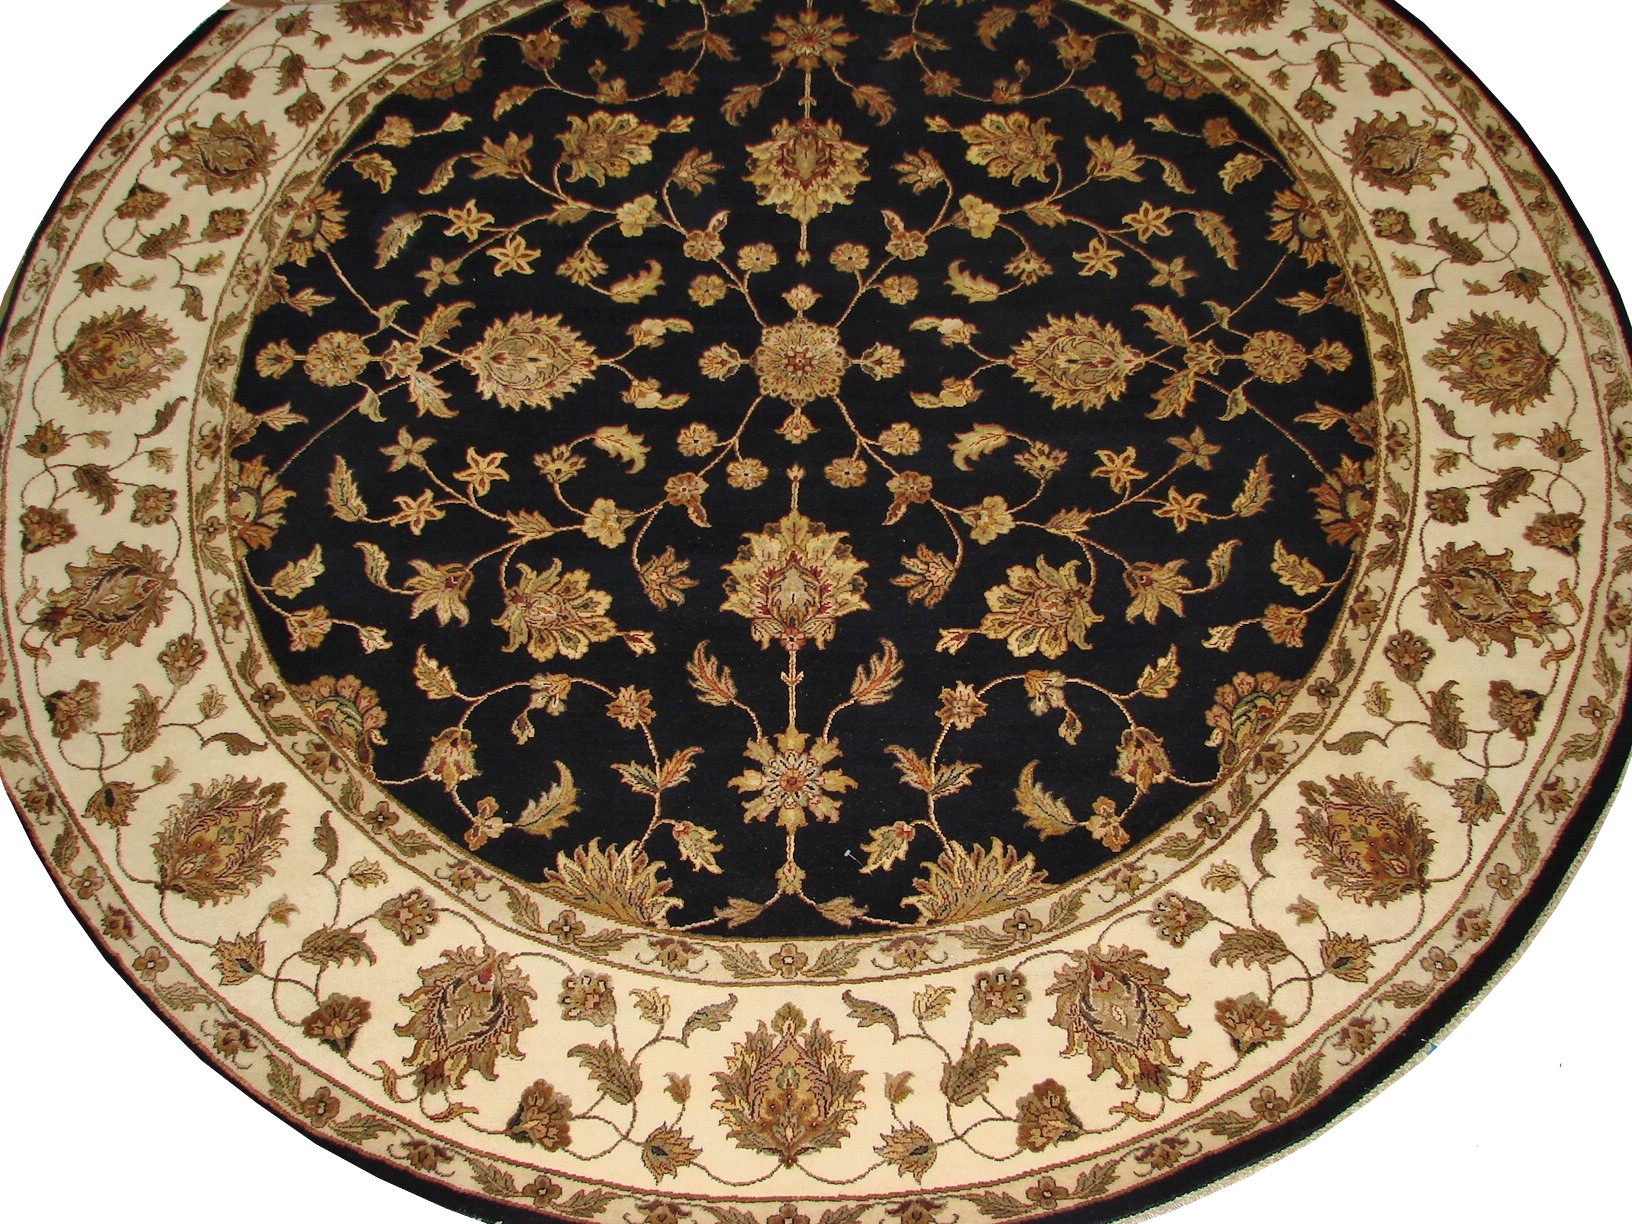 9 ft. & Over Round & Square Silk Flower Hand Knotted Wool Area Rug - MR16016